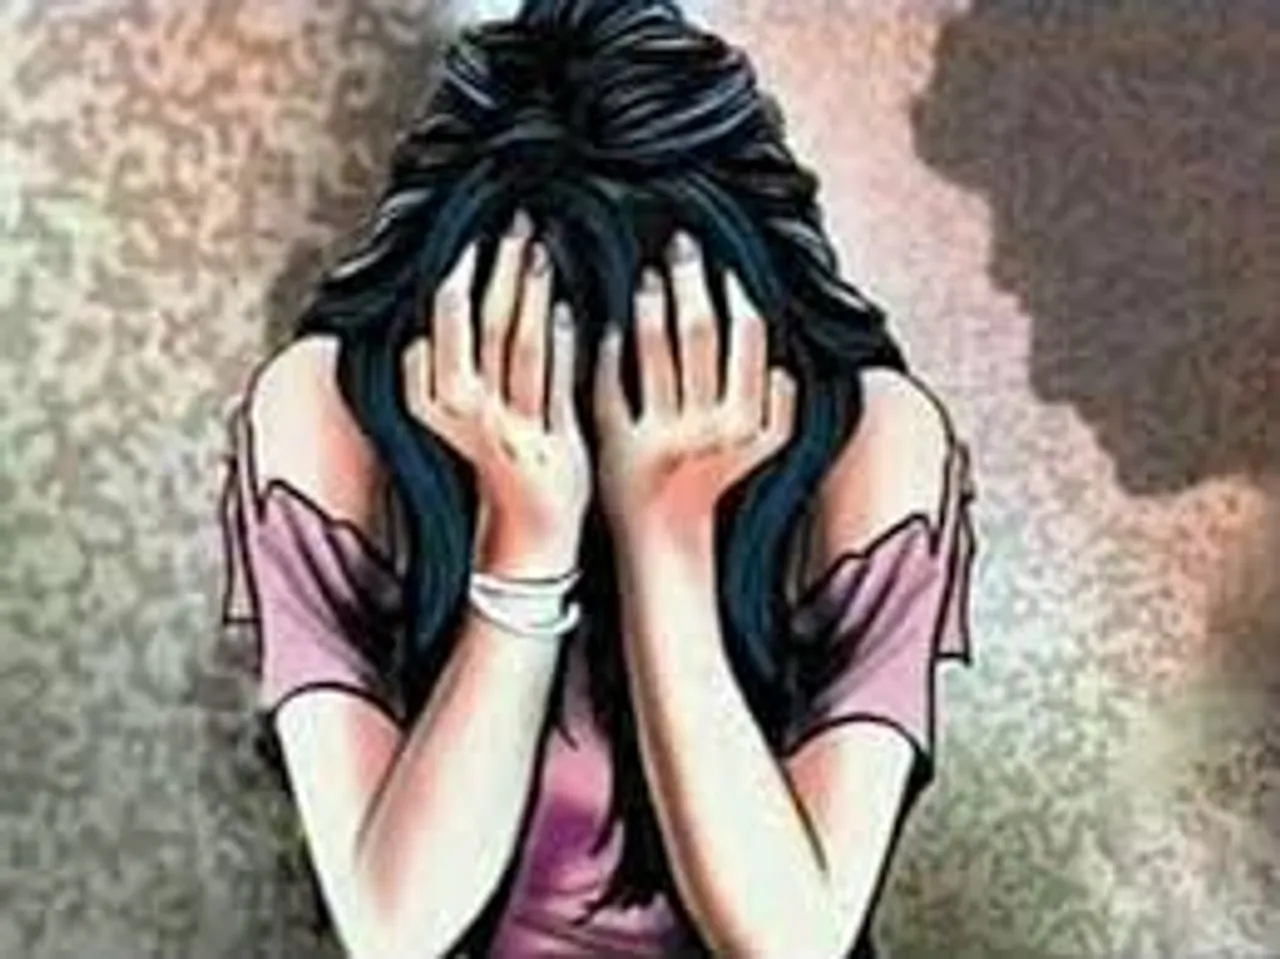 More Cases Tumble Out After Karjat School Caretaker Accused Of Rape